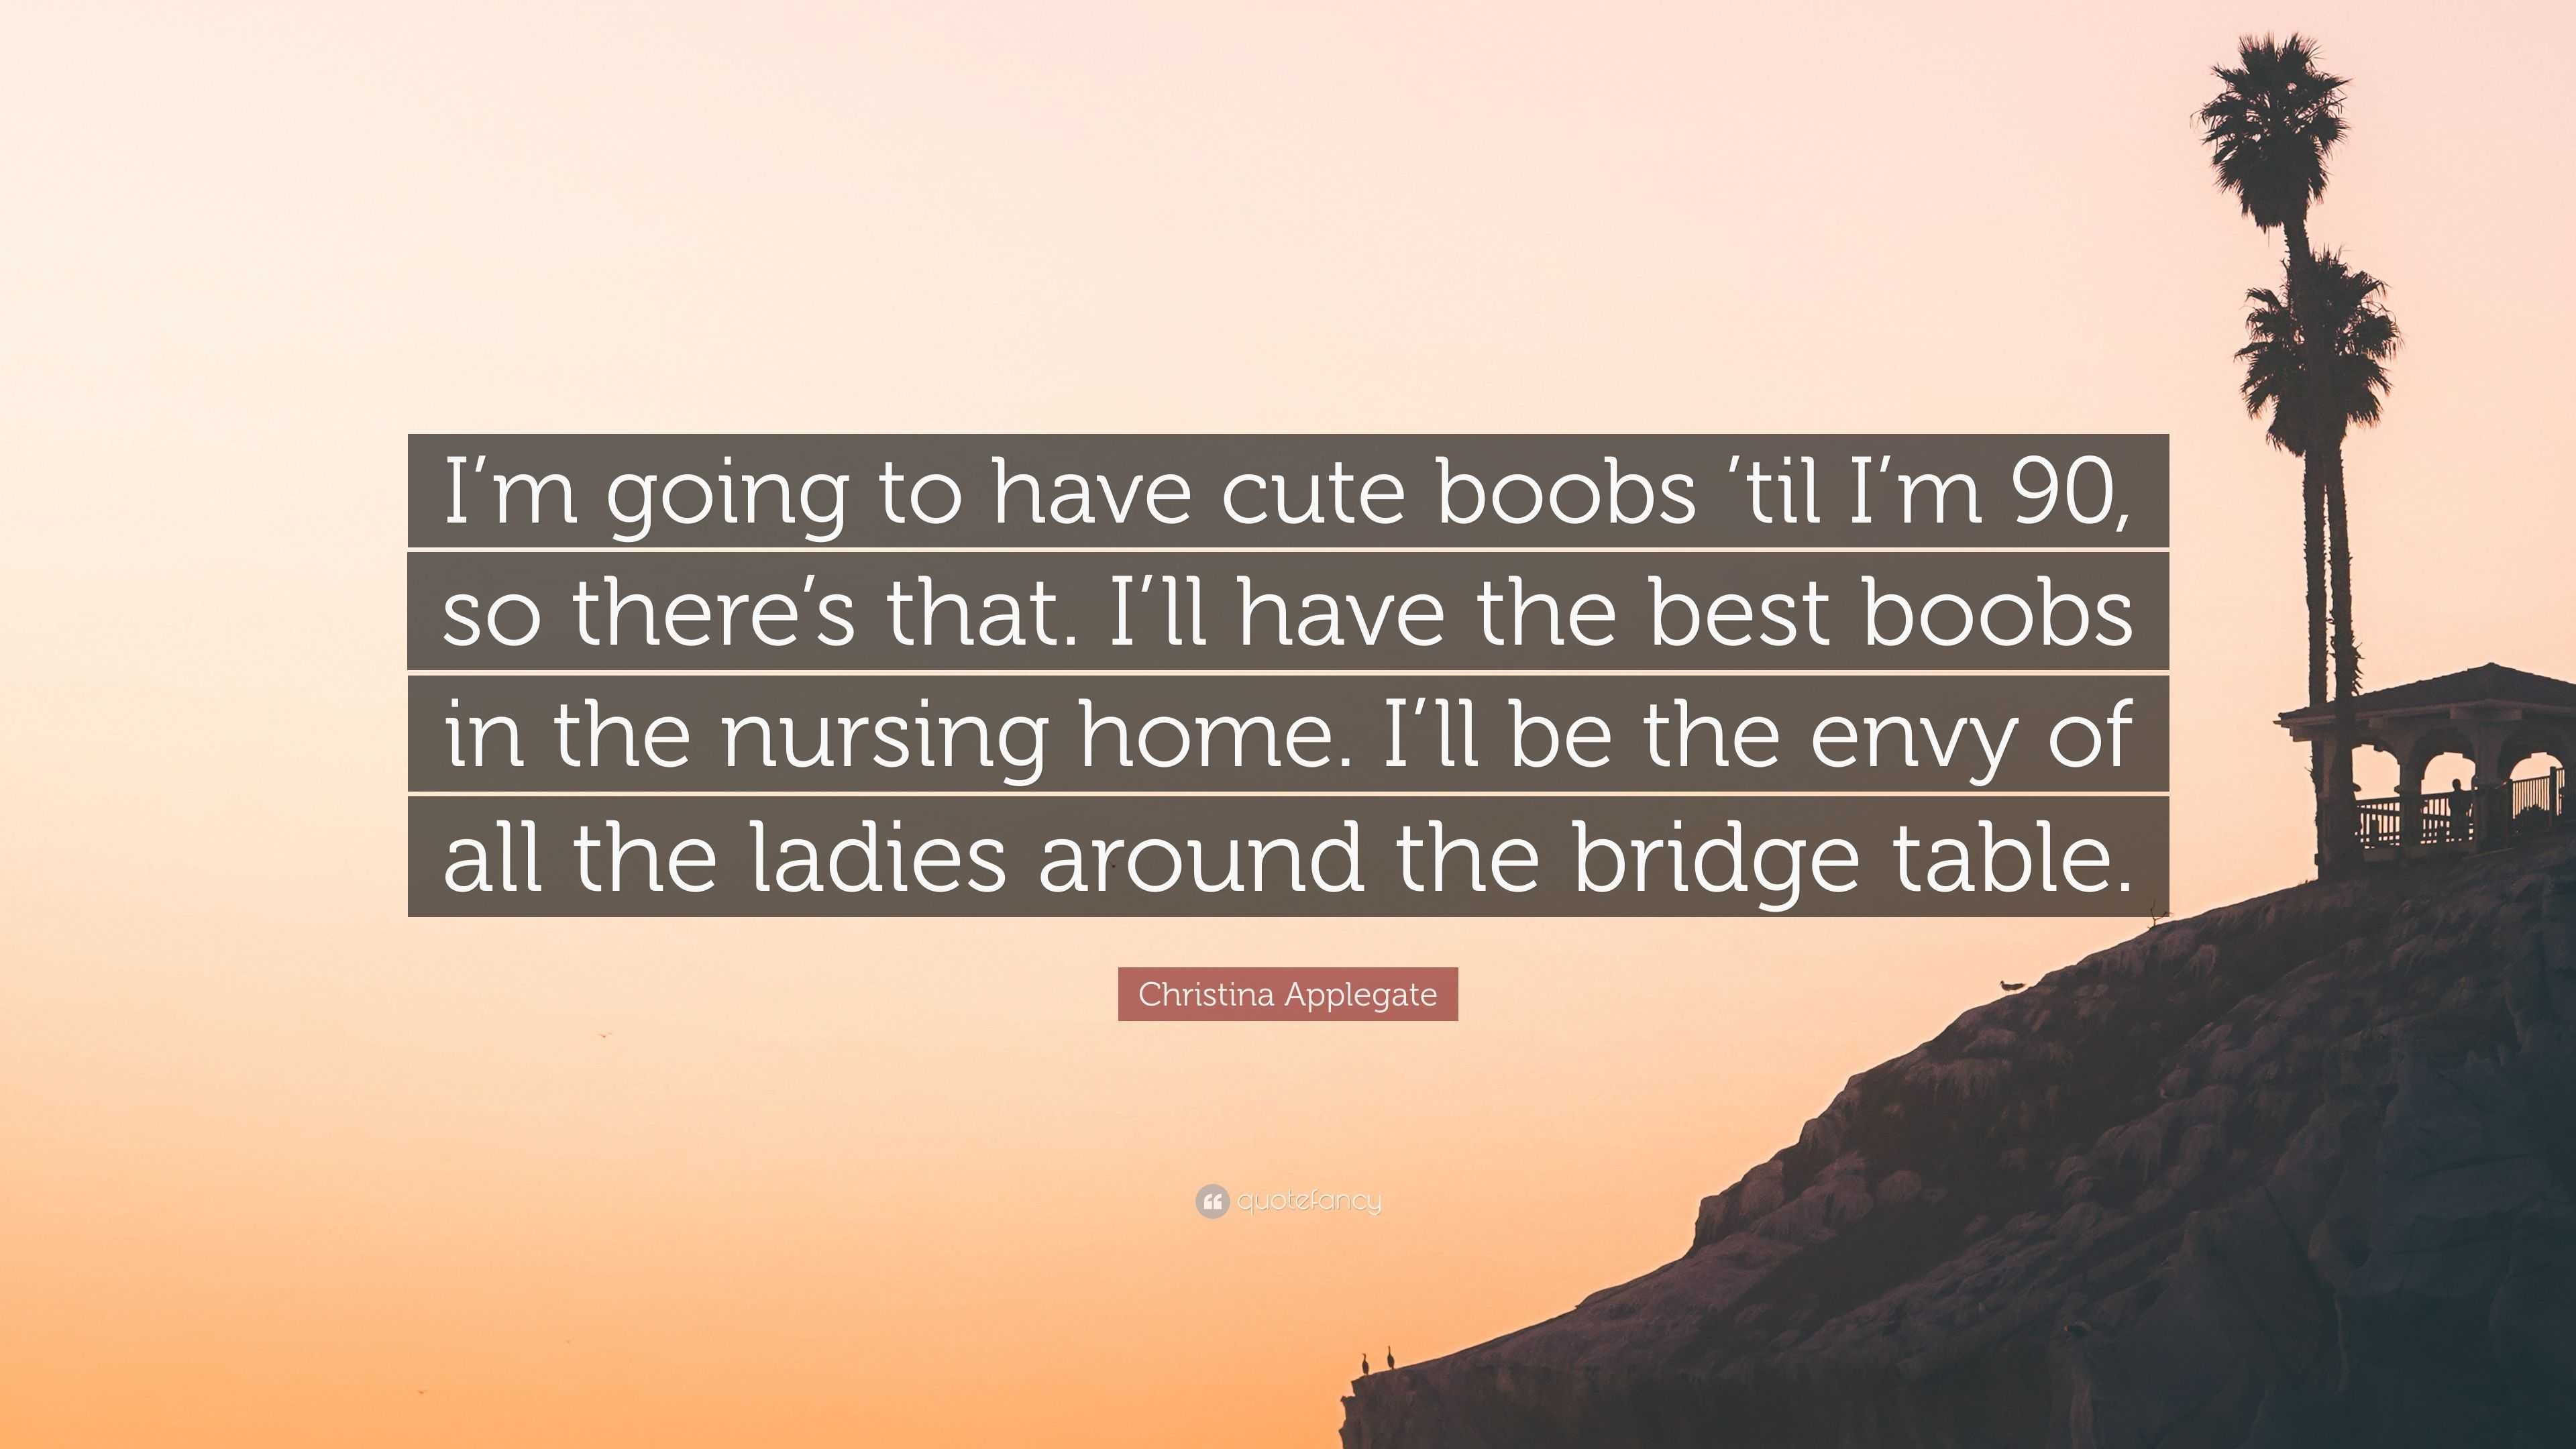 Christina Applegate Quote: “I'm going to have cute boobs 'til I'm 90, so  there's that. I'll have the best boobs in the nursing home. I'll be the  env”